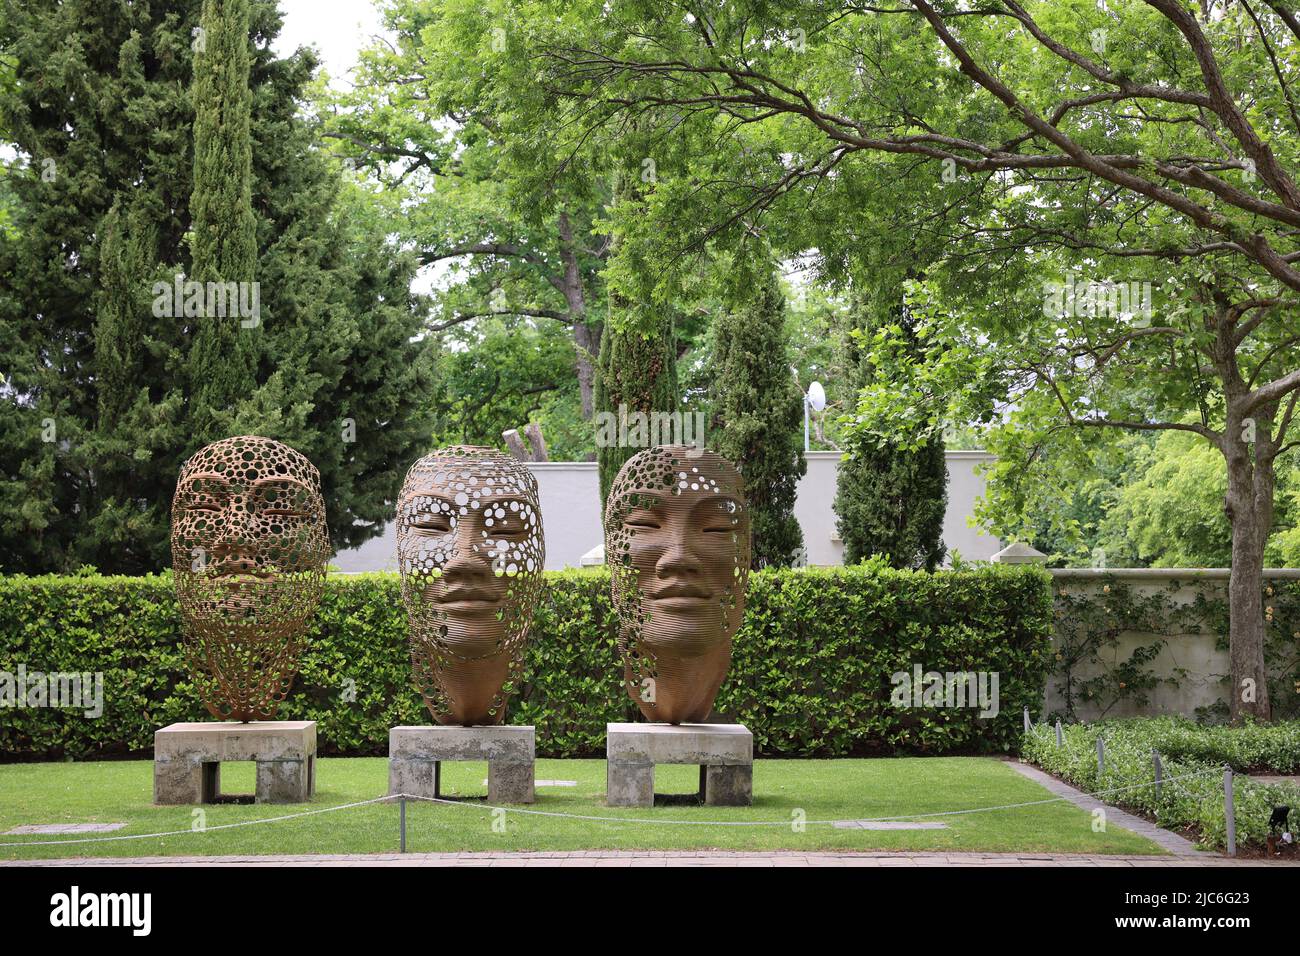 Sculptures in the garden of Cape Town, green trees, park, South Africa Stock Photo